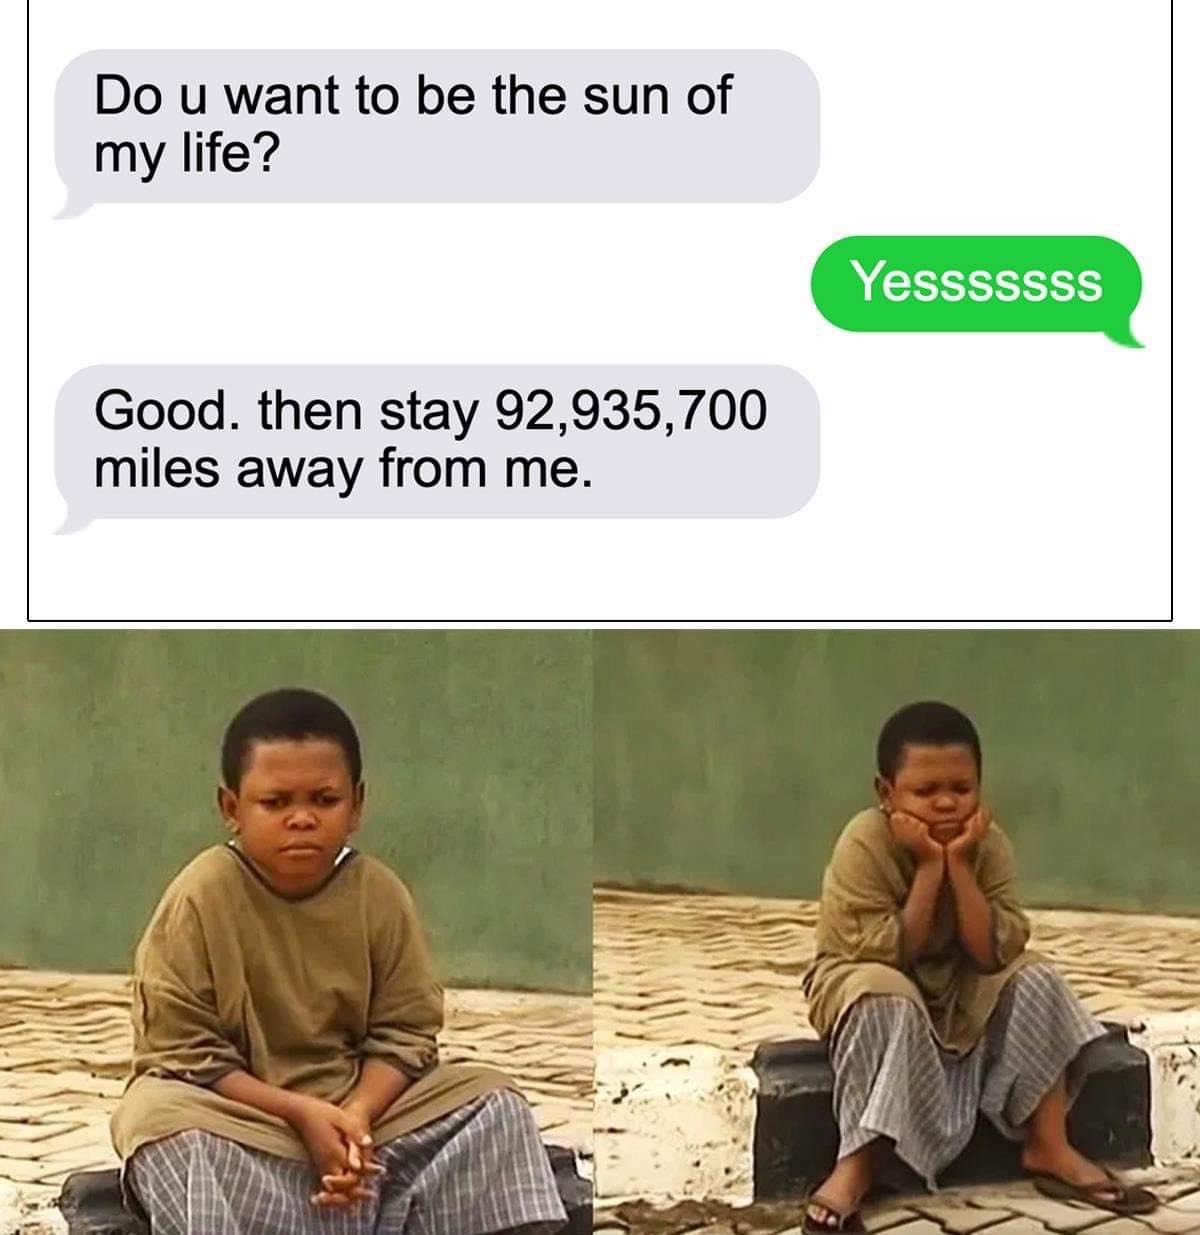 funny memes - osita iheme meme template - Do u want to be the sun of my life? Yesssssss Good, then stay 92,935,700 miles away from me.